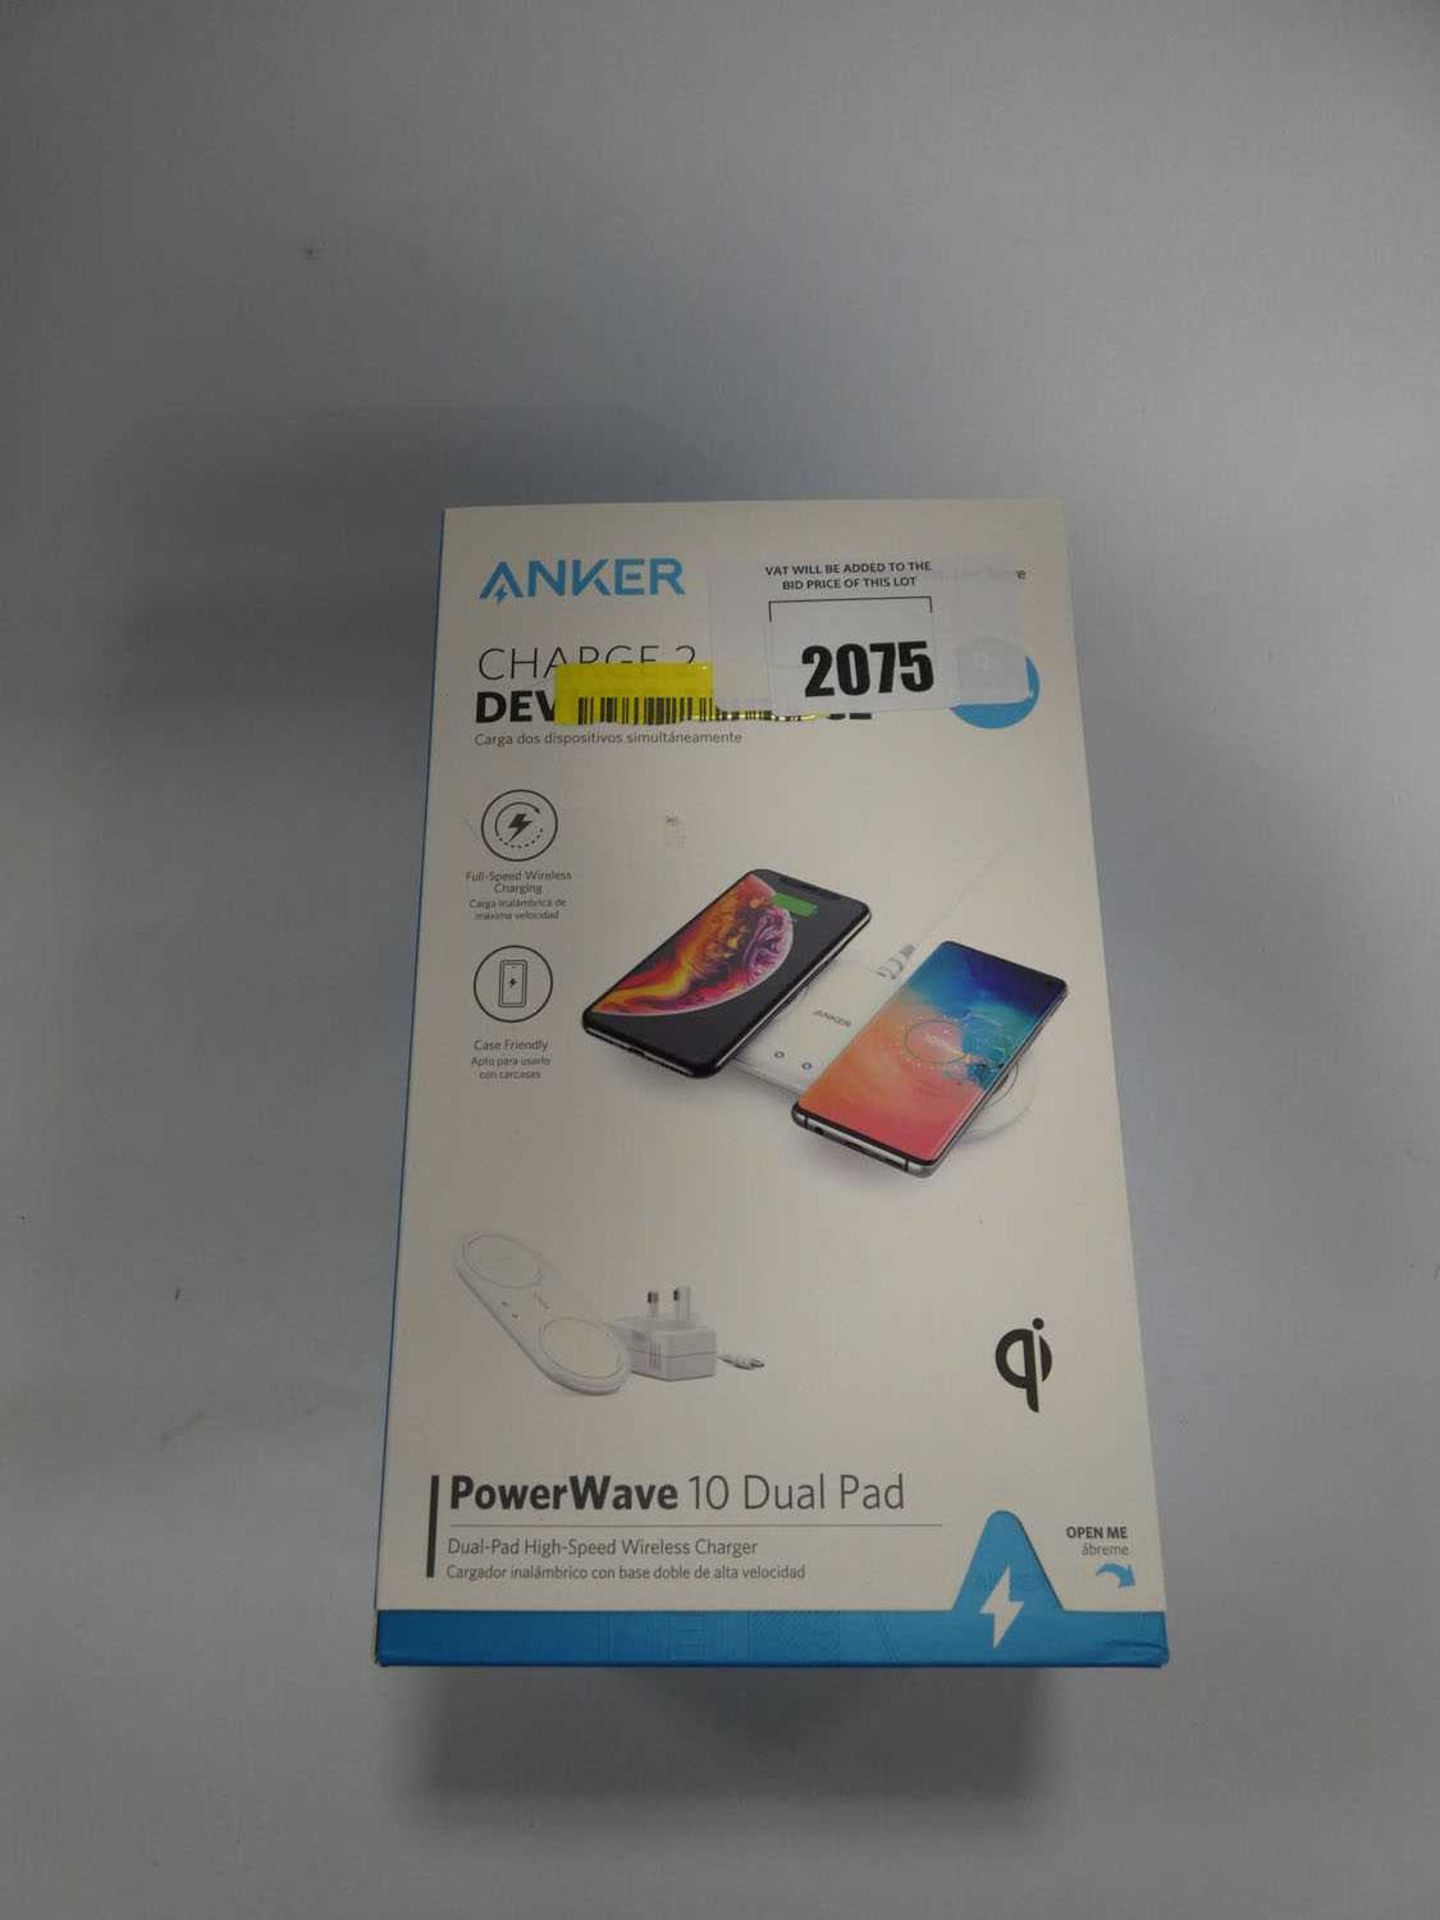 +VAT Anker Charge 2 Powerwave 10 Dual pad mobile phone charging station in box